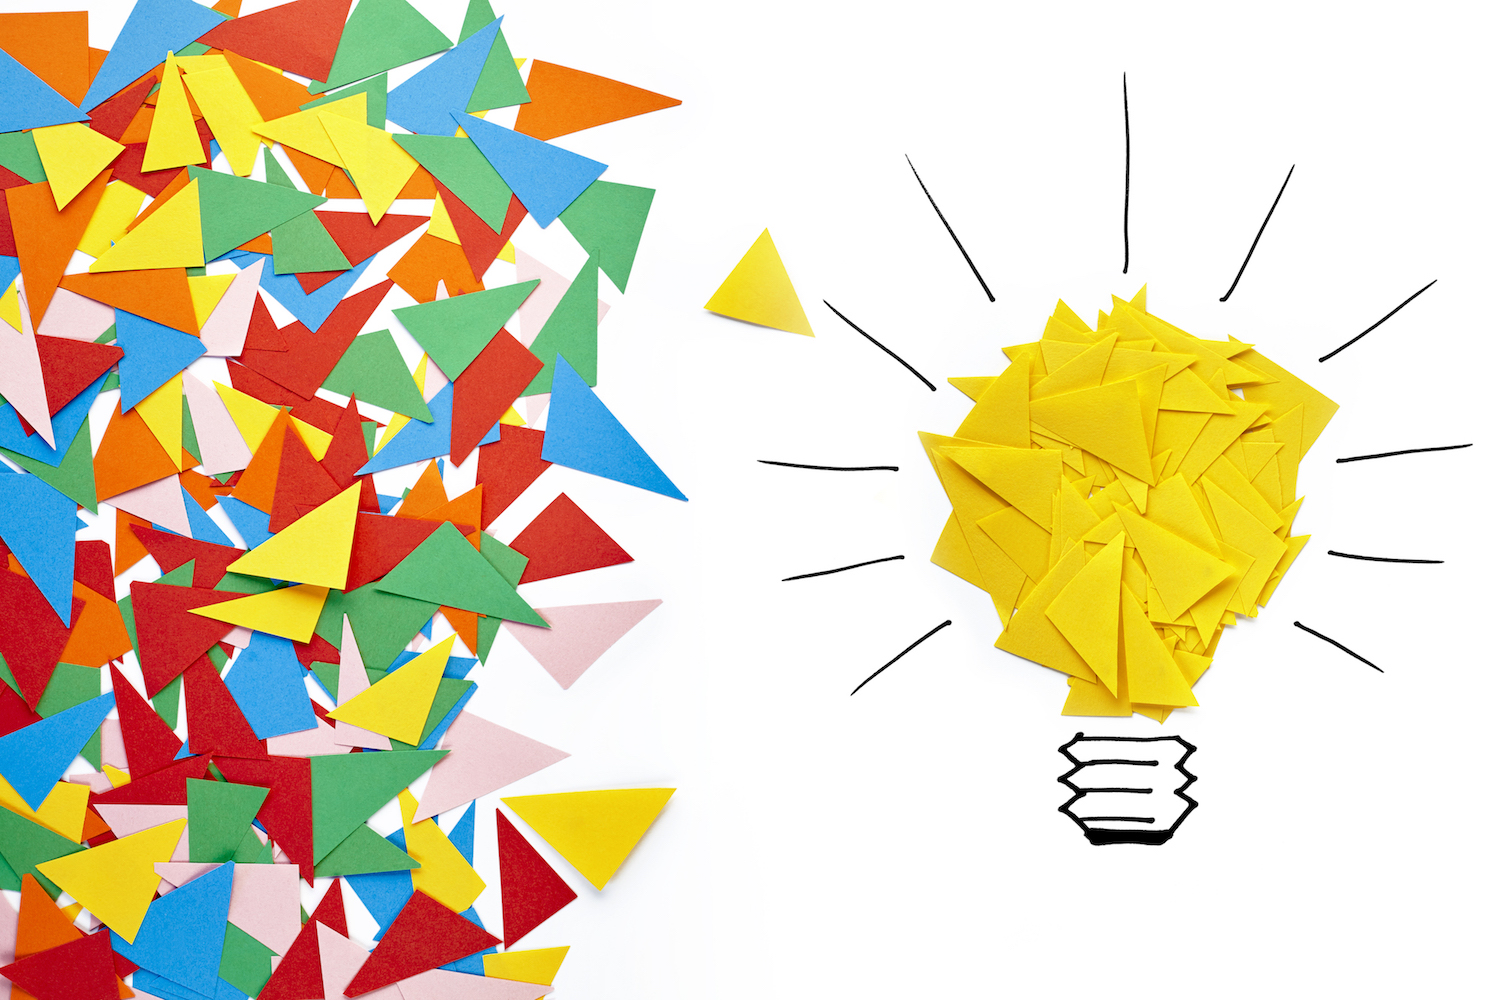 Scraps of colorful paper in a pile on the left and yellow scraps of paper in the form of a light bulb on the right to show how using social media listening can generate ideas.